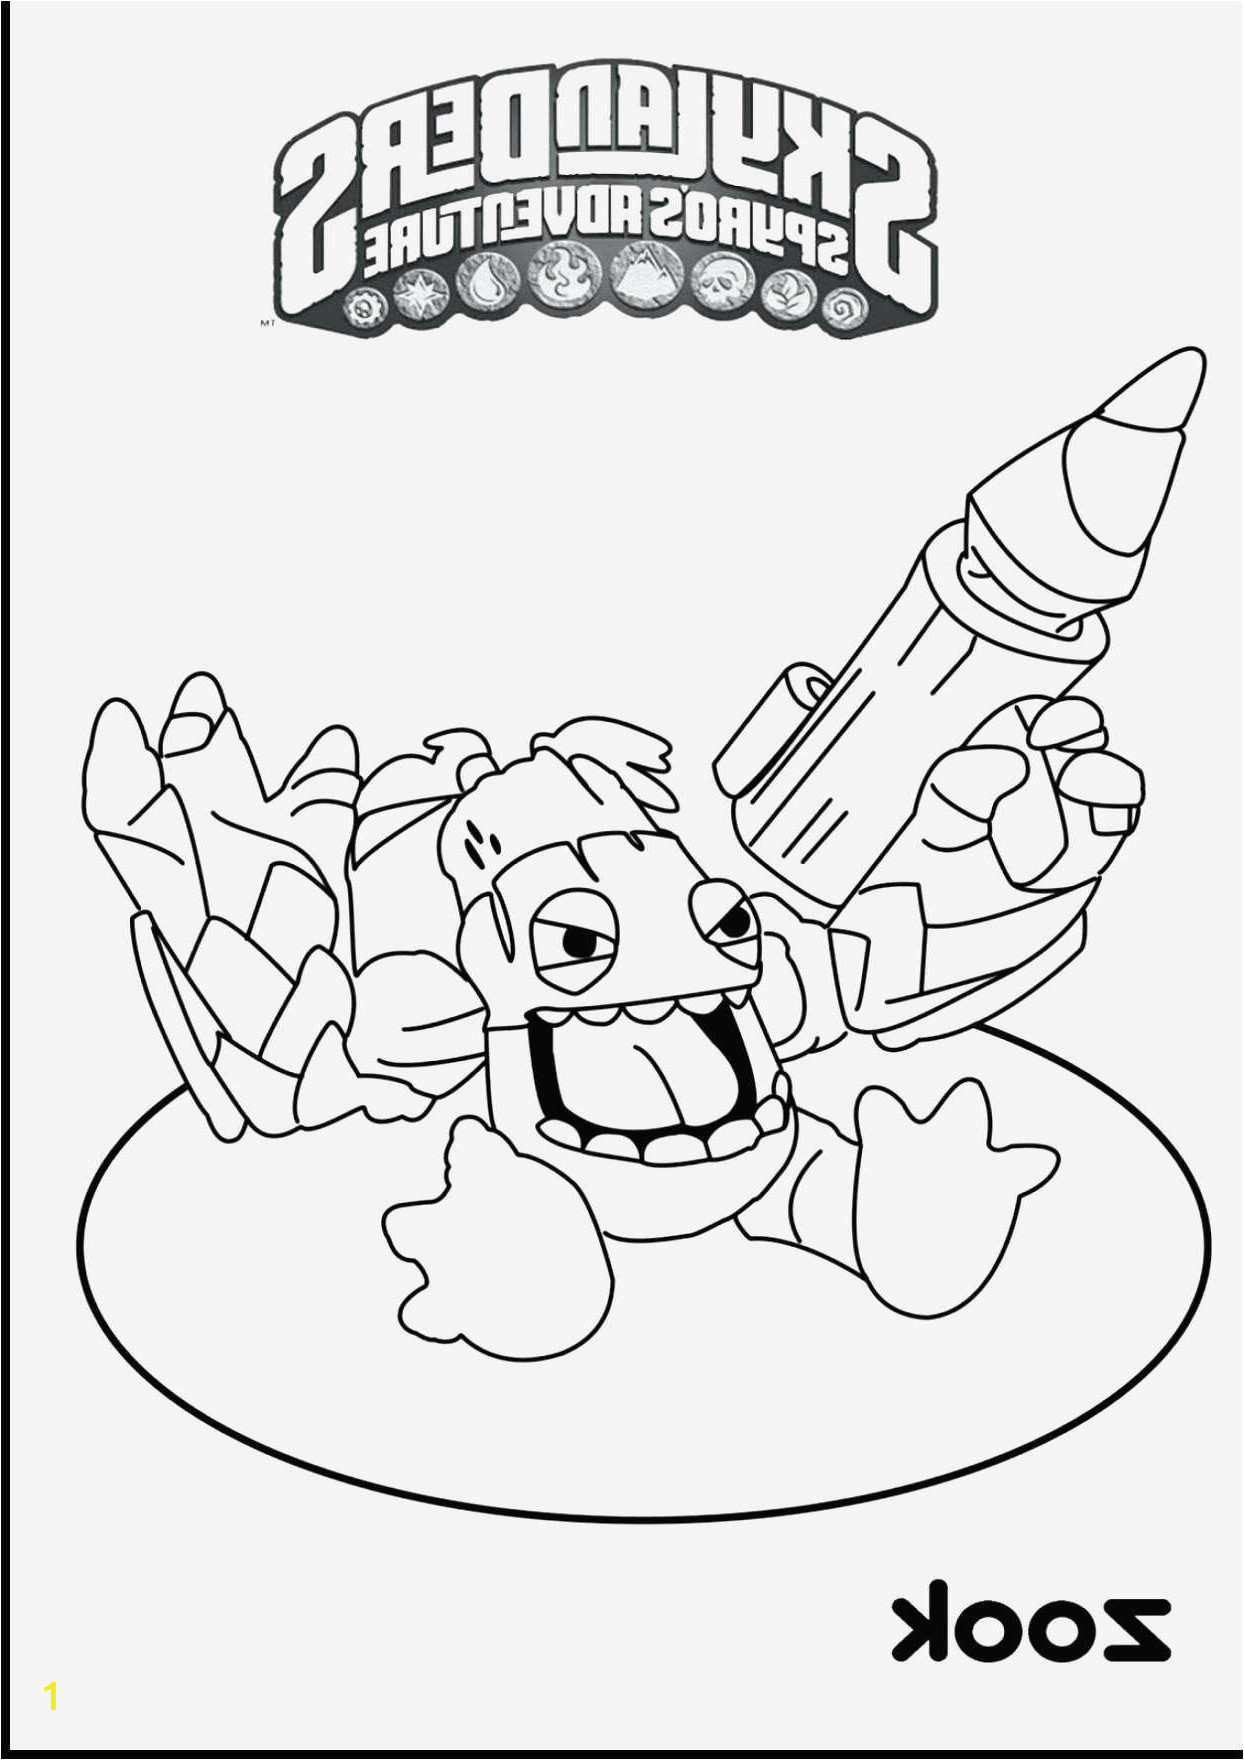 farm animals coloring picture cool images lovely printable coloring pages zoo animals of farm animals coloring picture